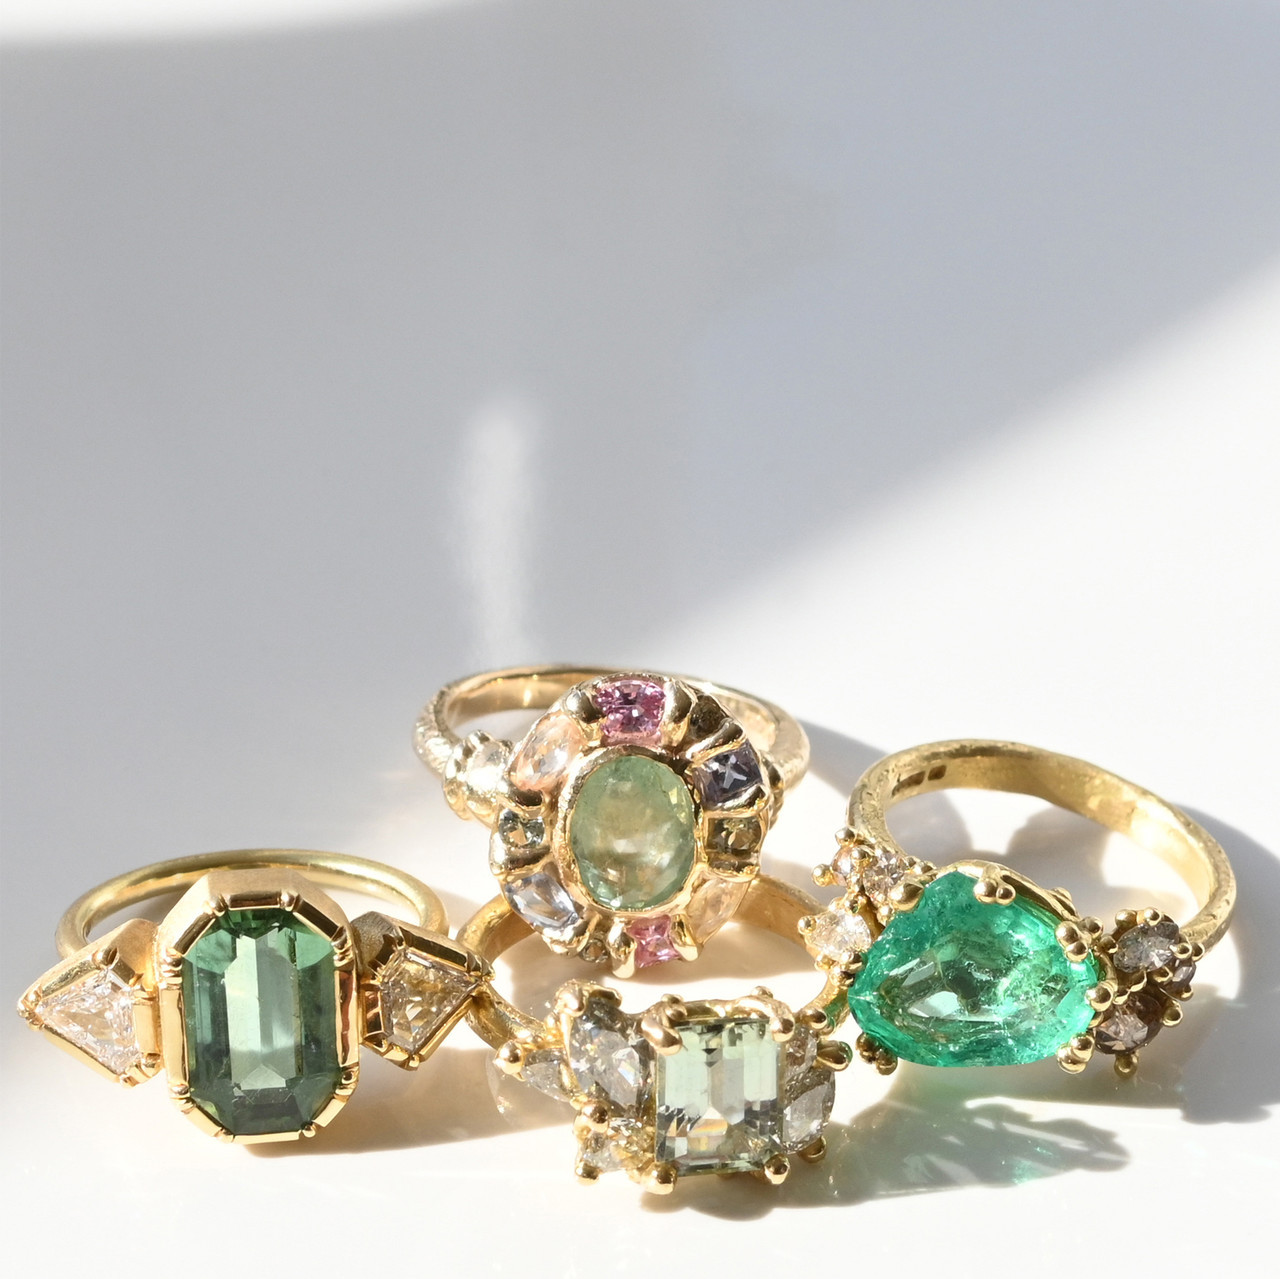 tf Exclusive Asymmetric Emerald & Diamond Cluster Ring, Ruth Tomlinson, tomfoolery